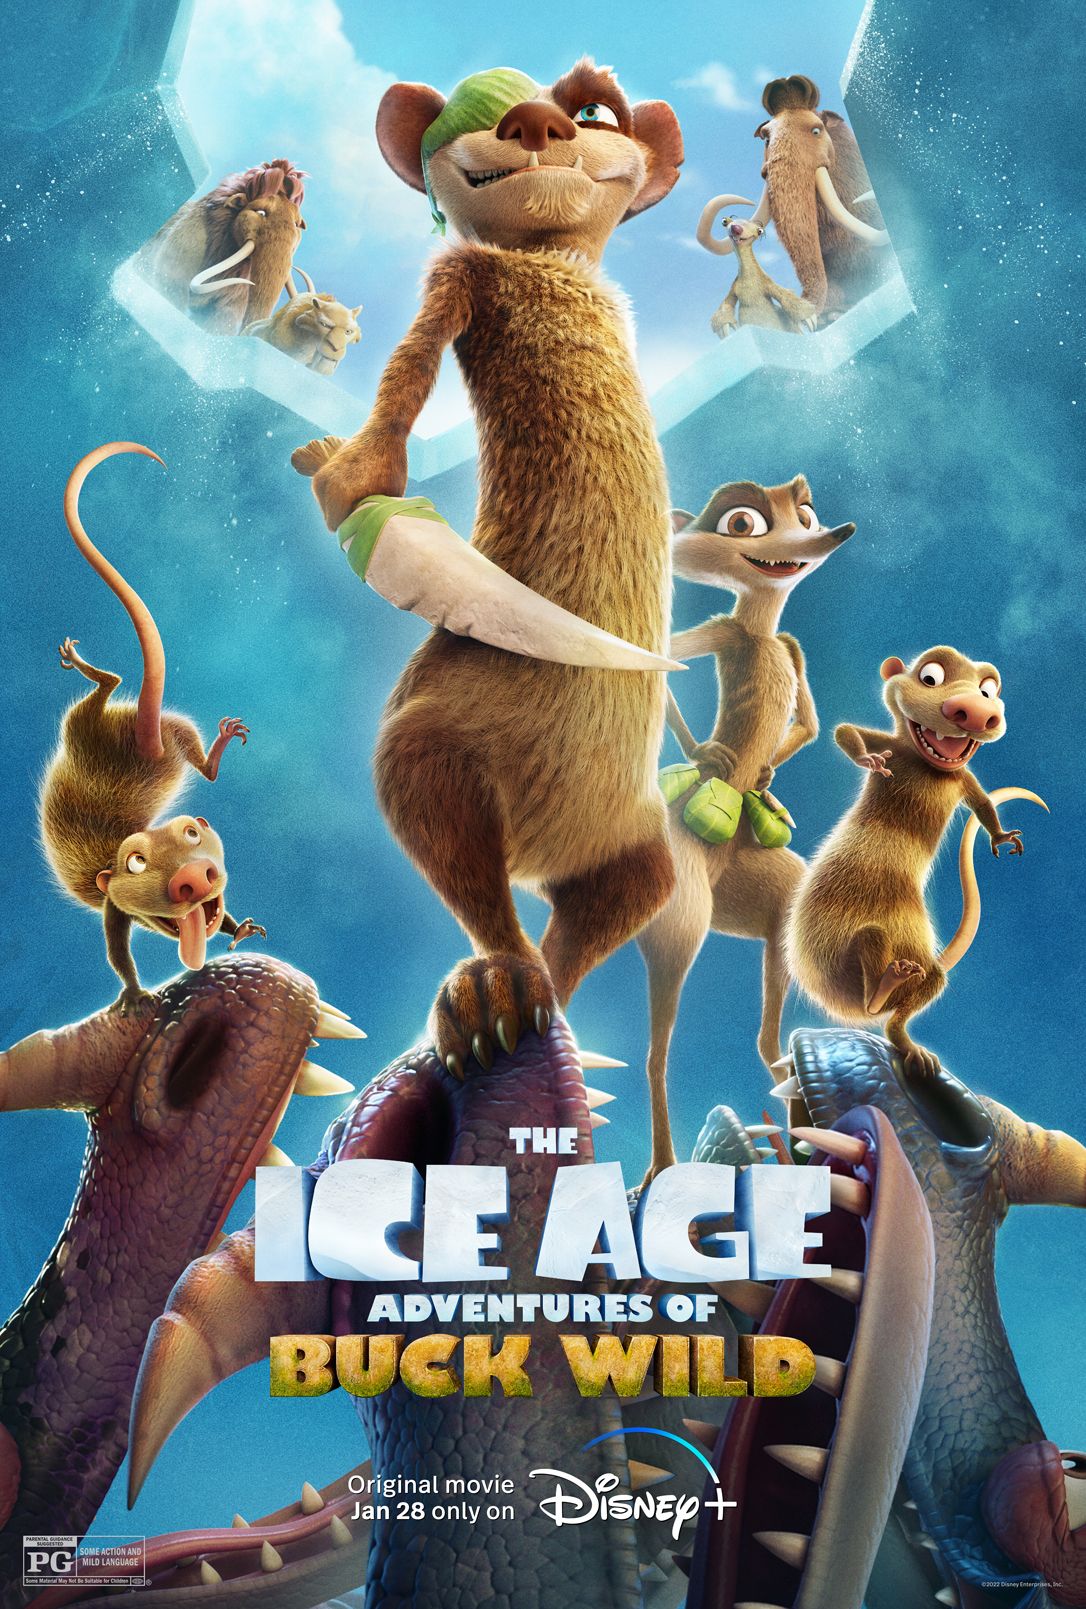 Ice Age Movies in Order: How to Watch Chronologically or by